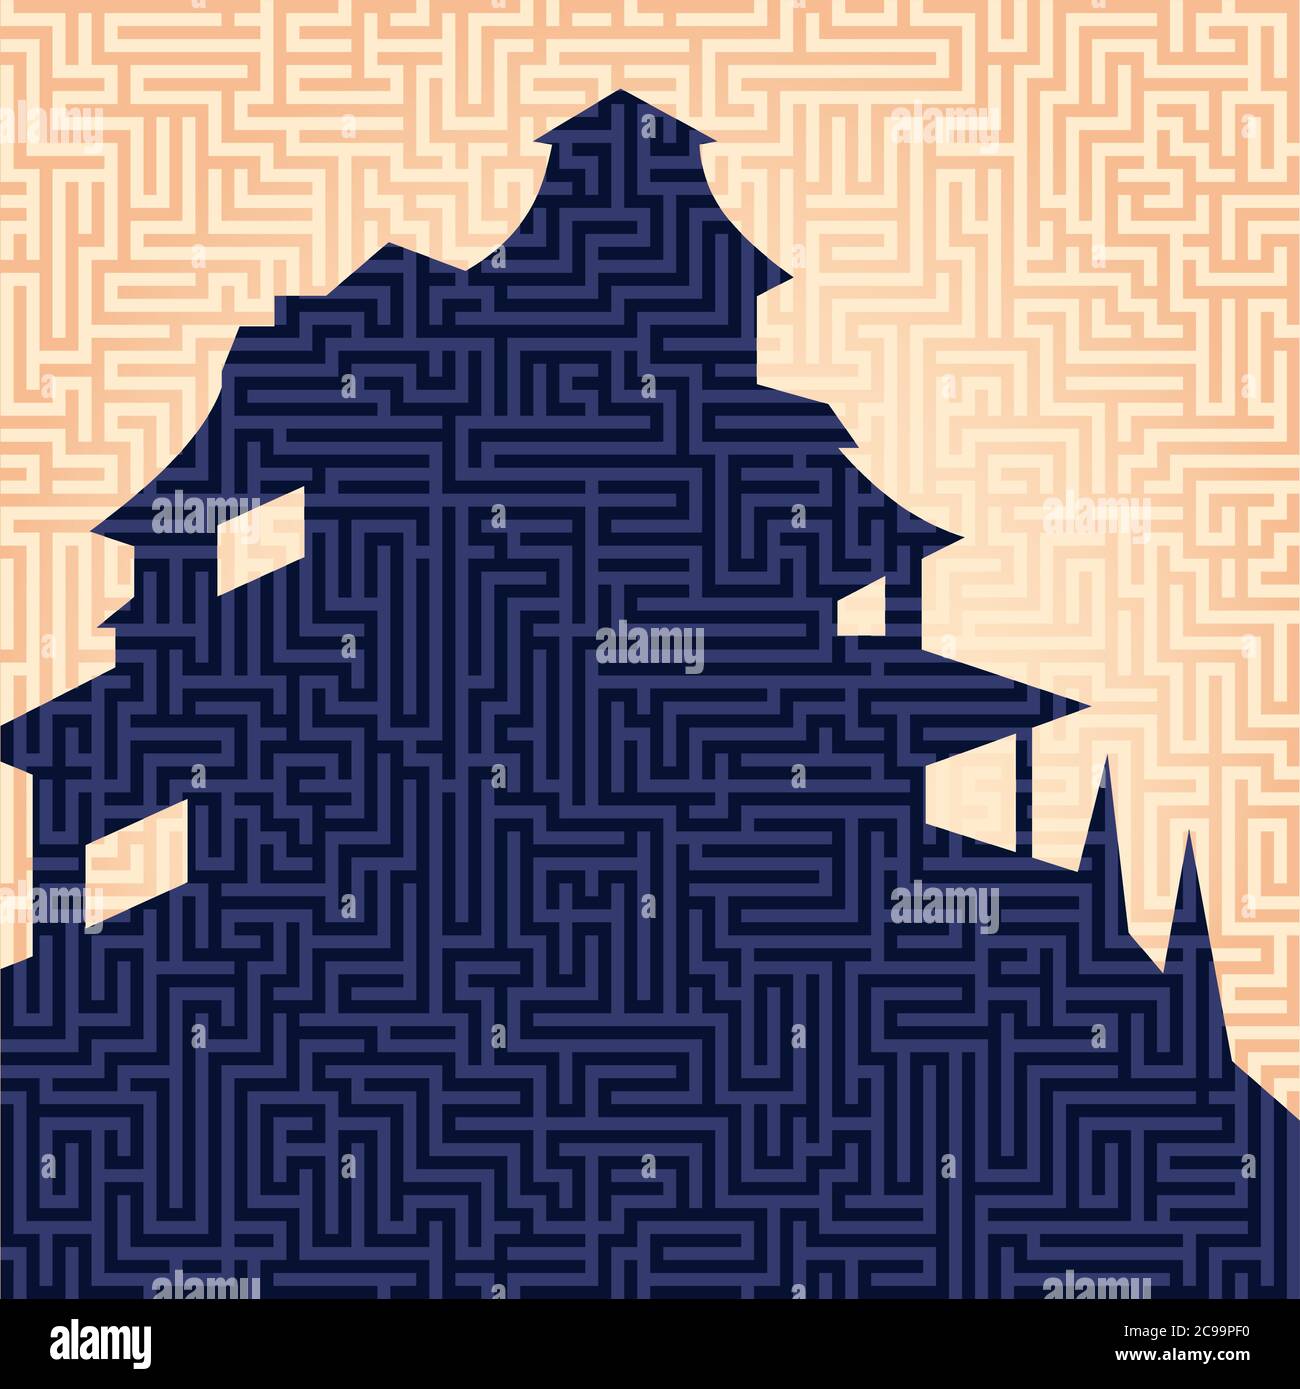 Vector illustration. Mansion silhouette with maze or labyrinth texture. Isolated. Stock Vector